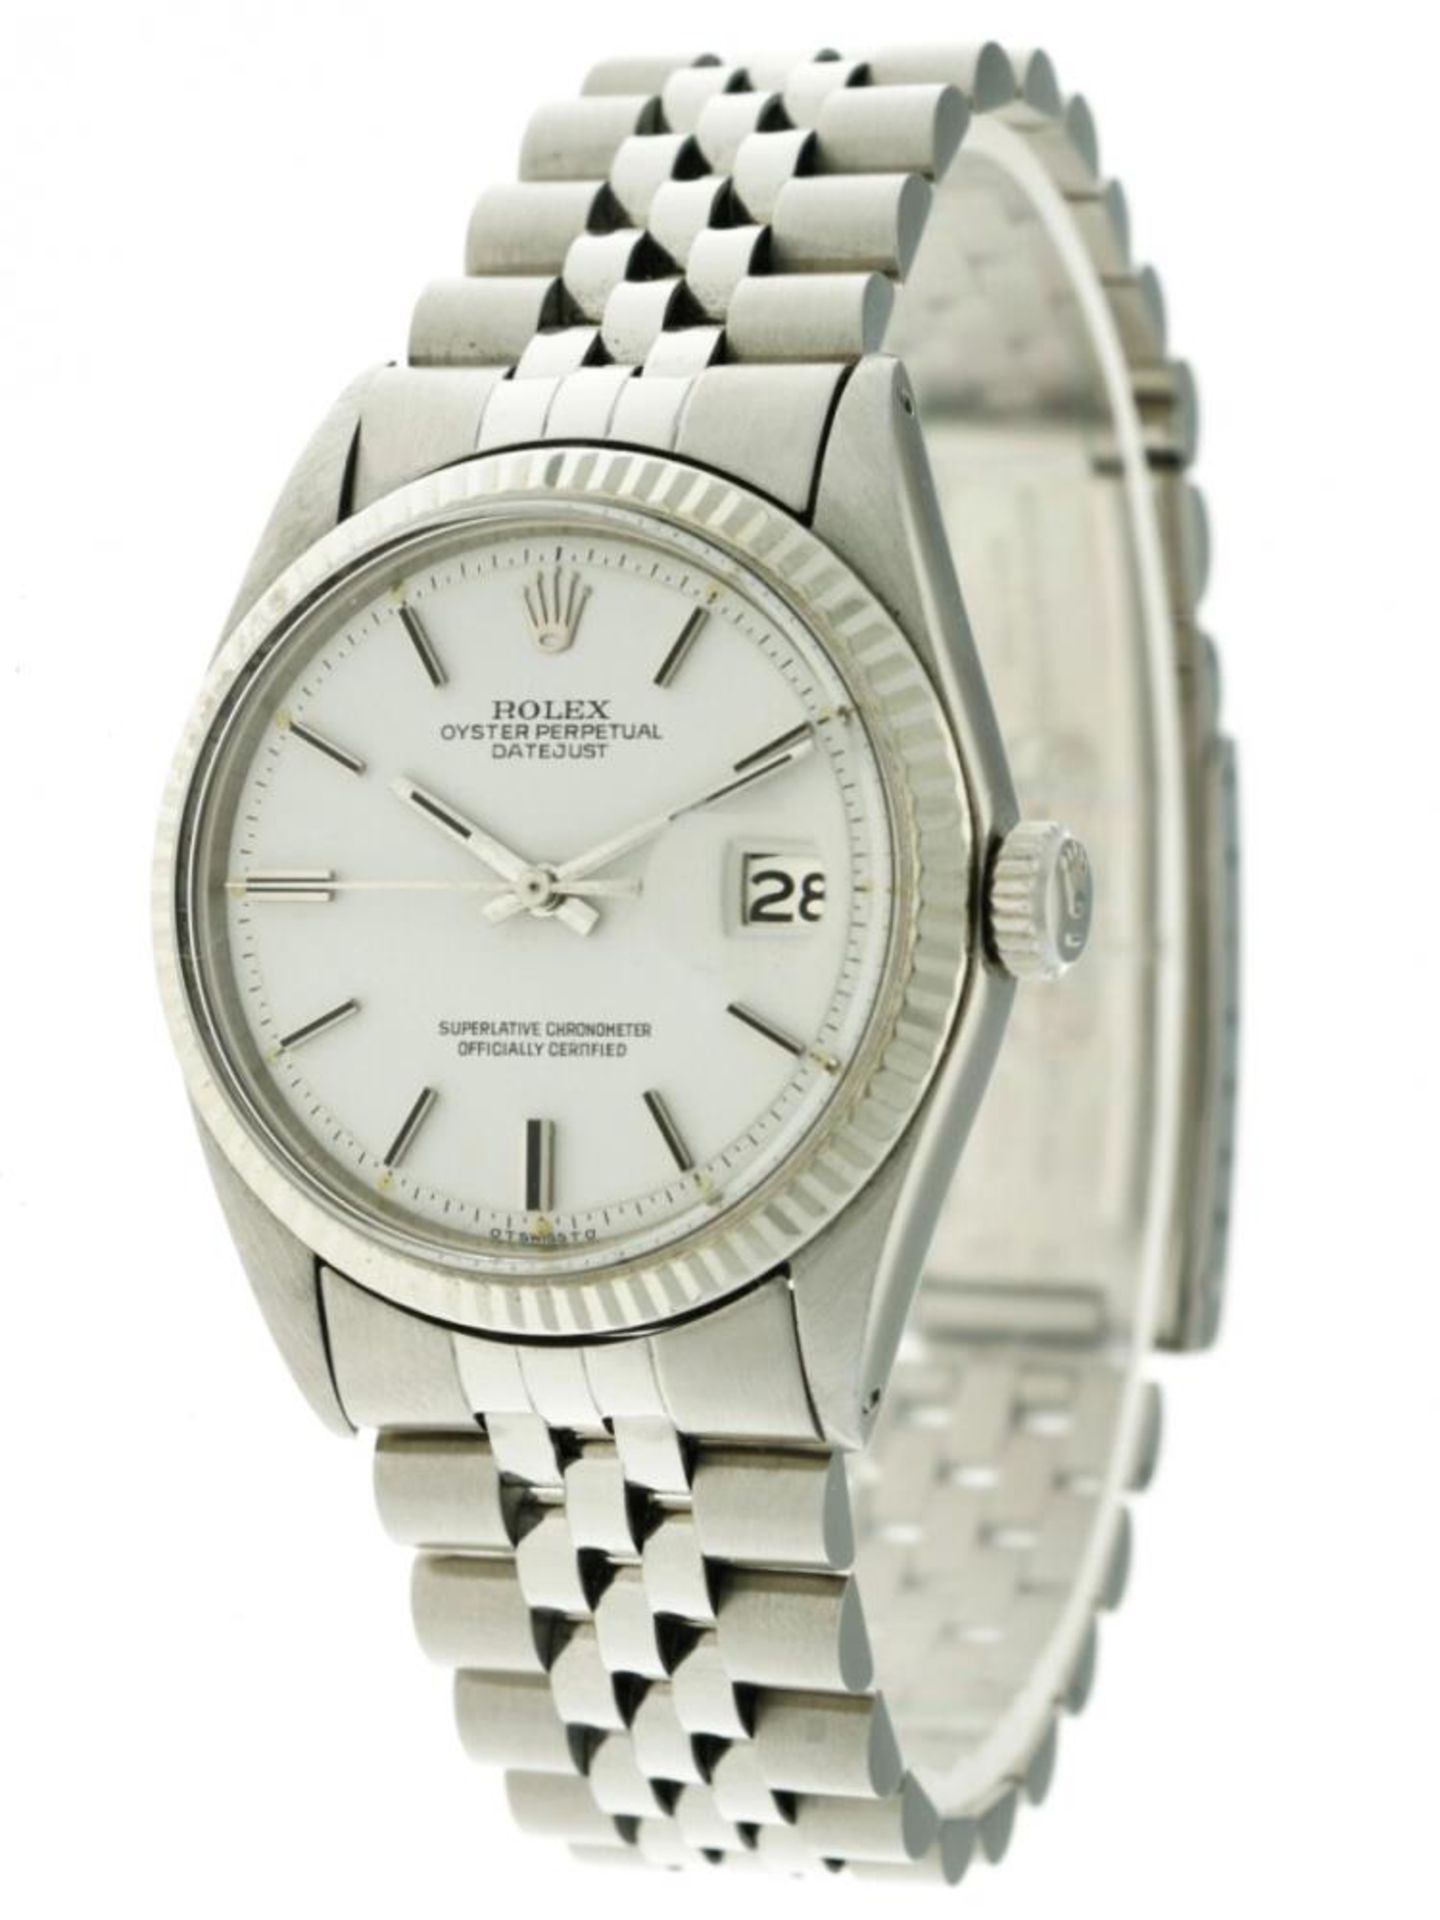 Rolex Datejust Sigma Dial 1601 - Men's watch -apprx. 1972. - Image 2 of 7